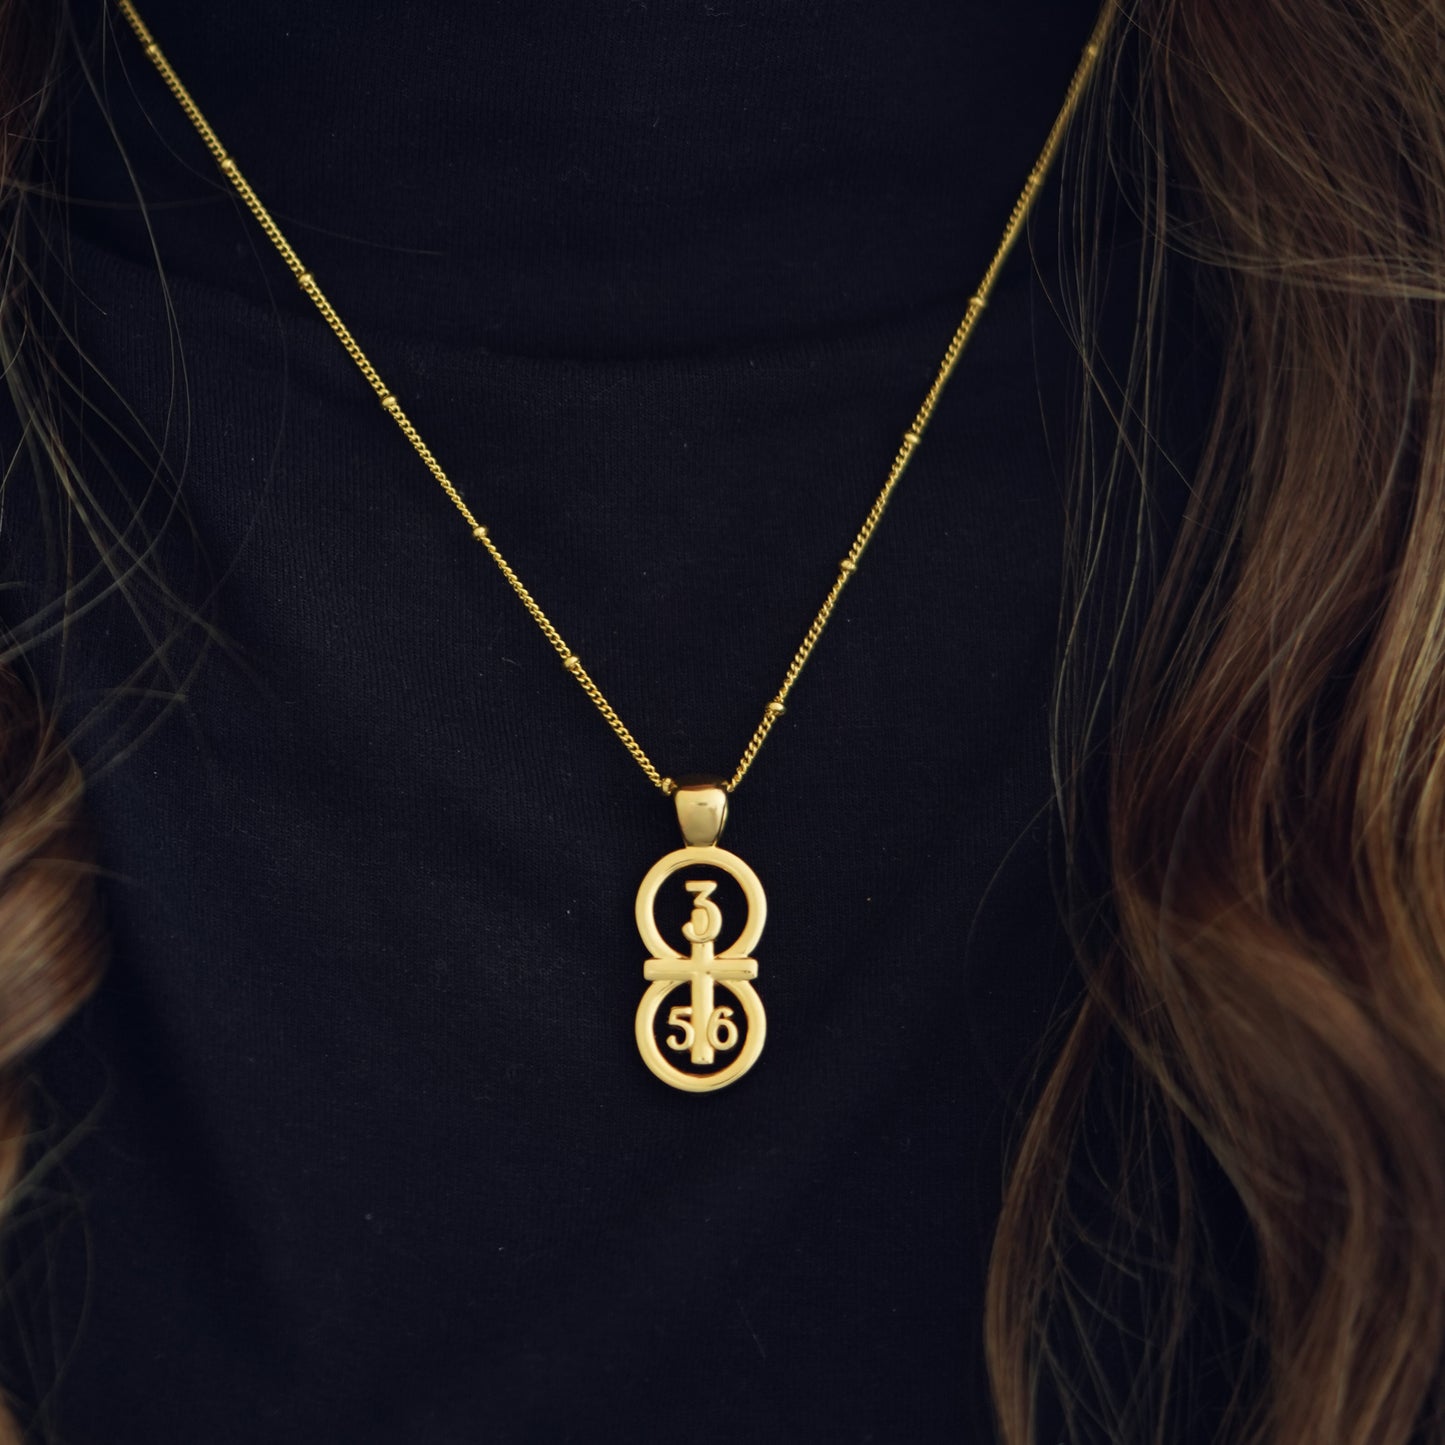 Gold large pendants displayed on the neck against a black shirt with our 14k gold filled satellite chain. Our RIYAN  29 and 11® pendant has the numbers 3, 5, and 6 intertwined with the cross to represent Proverbs 3:5-6 with the chapter word "Proverbs" inscribed on the back.